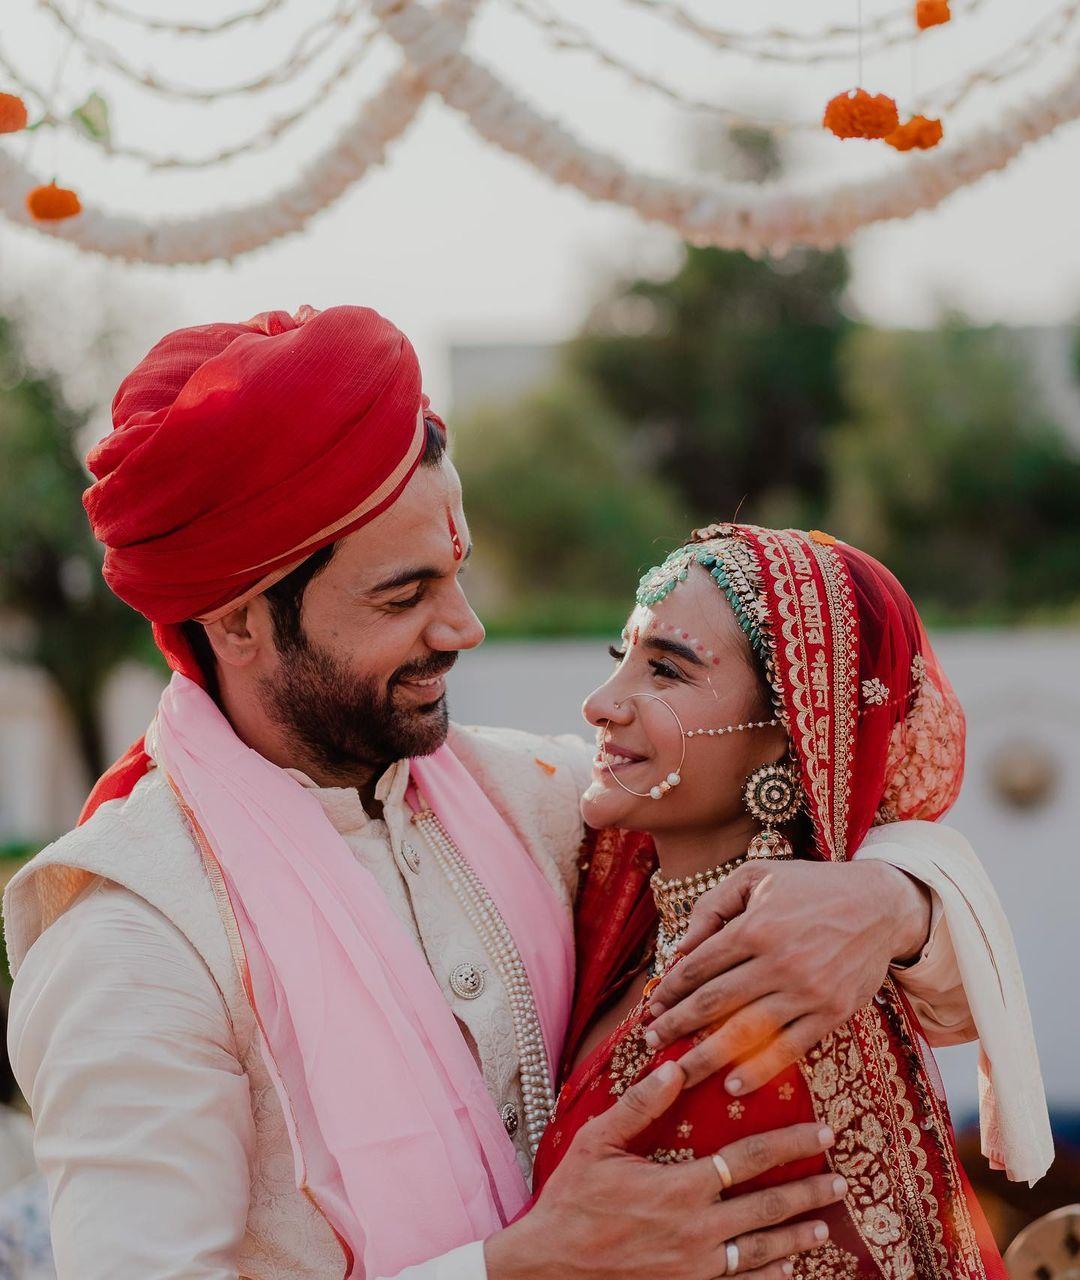 Rajkummar Rao and Patralekhaa exchanged vows in a stunning wedding ceremony held in Chandigarh on November 15. Their destination wedding was hosted at The Oberoi Sukhvilas Spa Resort, located in Chandigarh